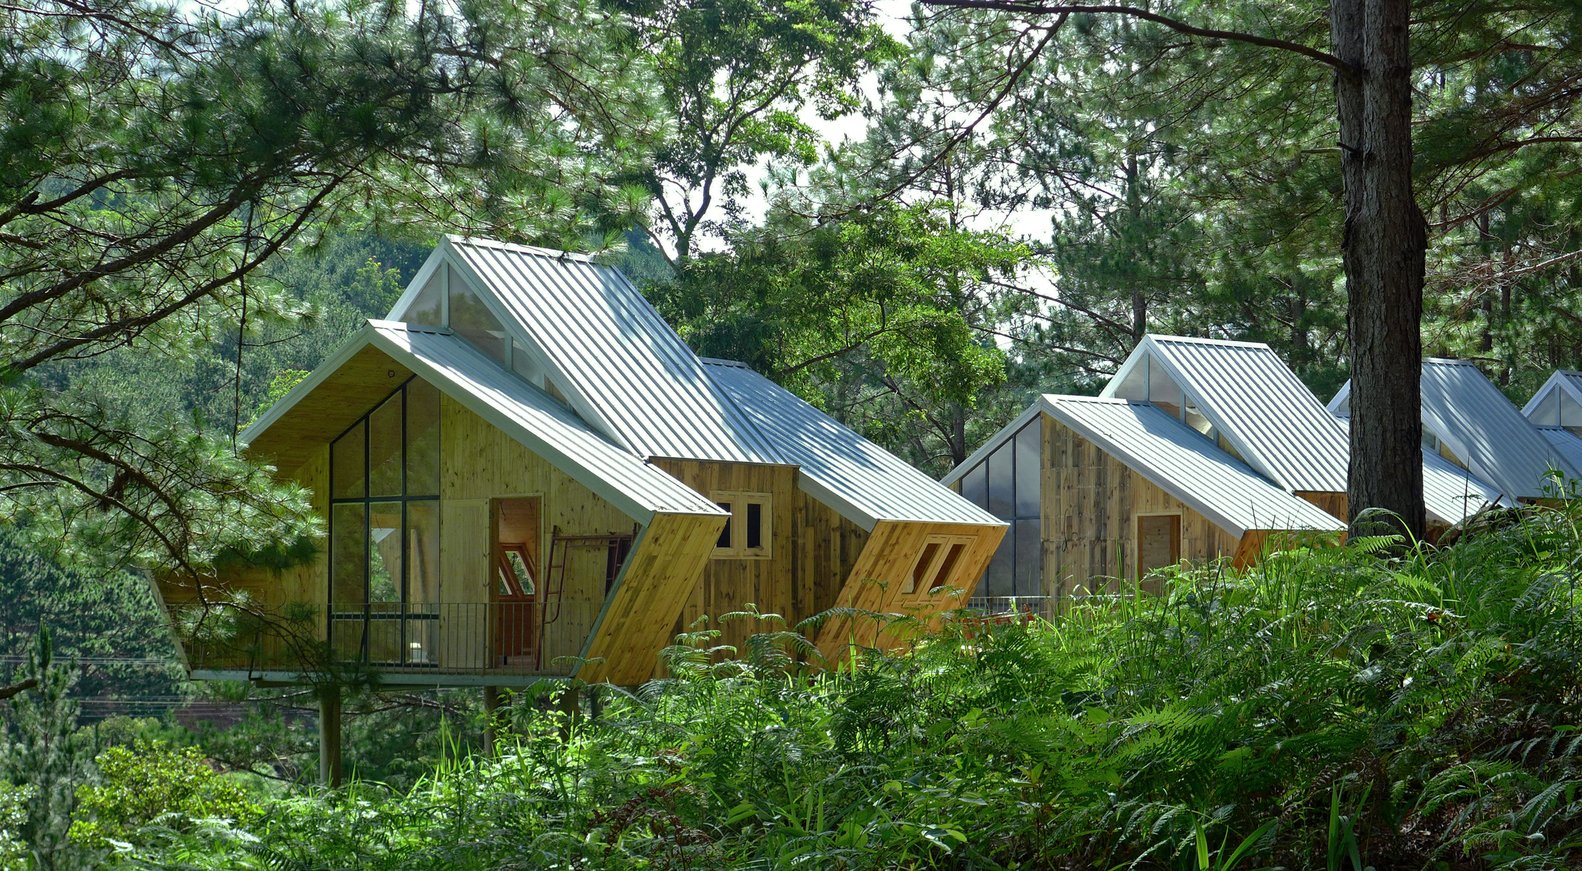 These Geometric Cabins Glow Like Lanterns in a Vietnamese Forest